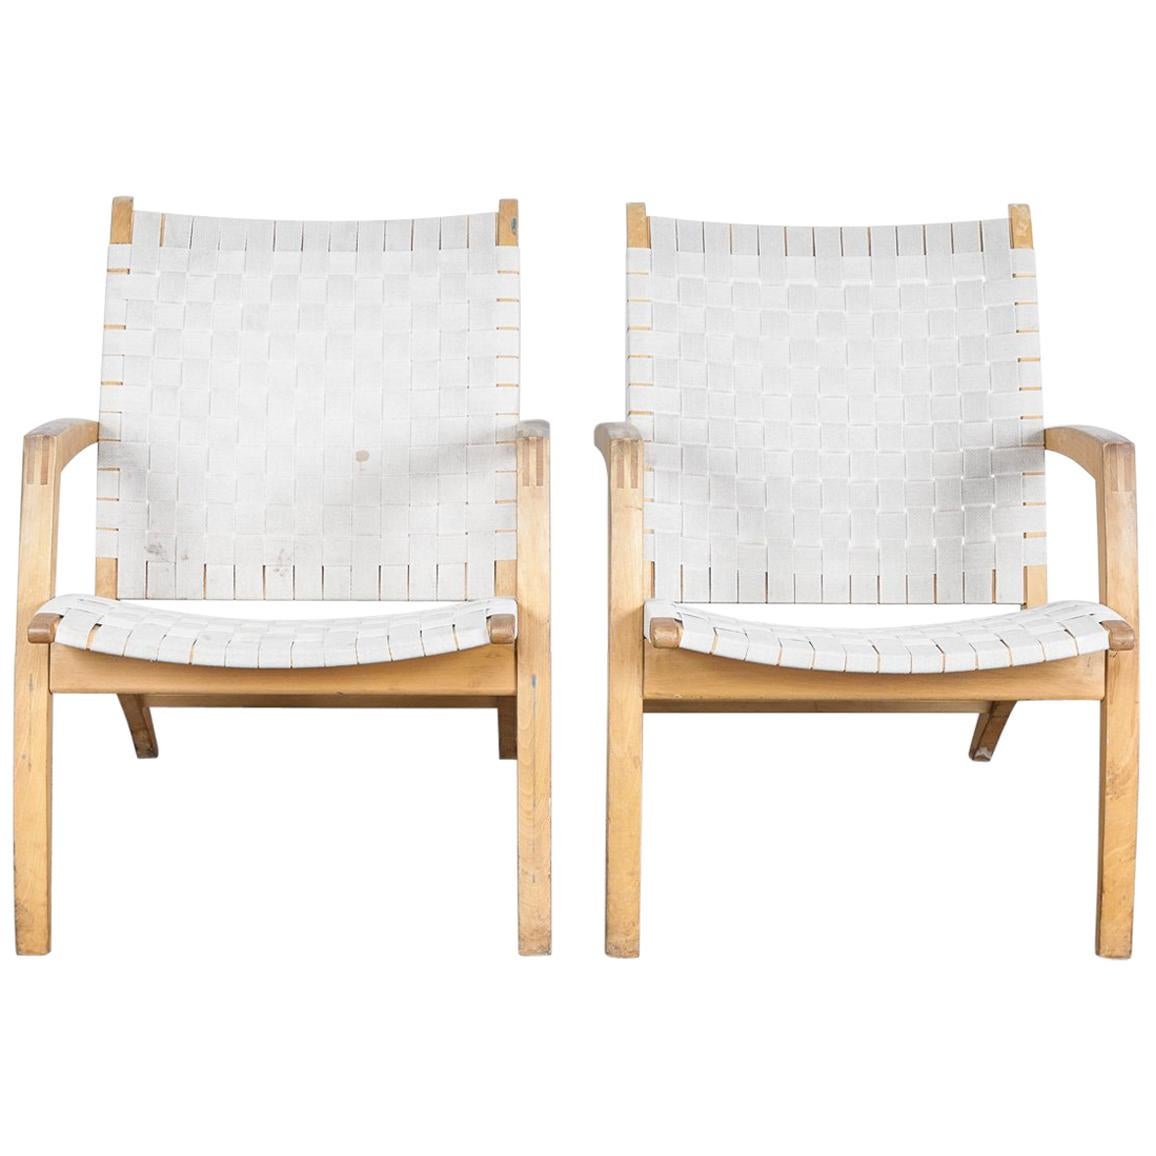 Pair of Beech Frame Lounge Chairs by Bill Potter for Vejle Mobelfabrik, Denmark For Sale